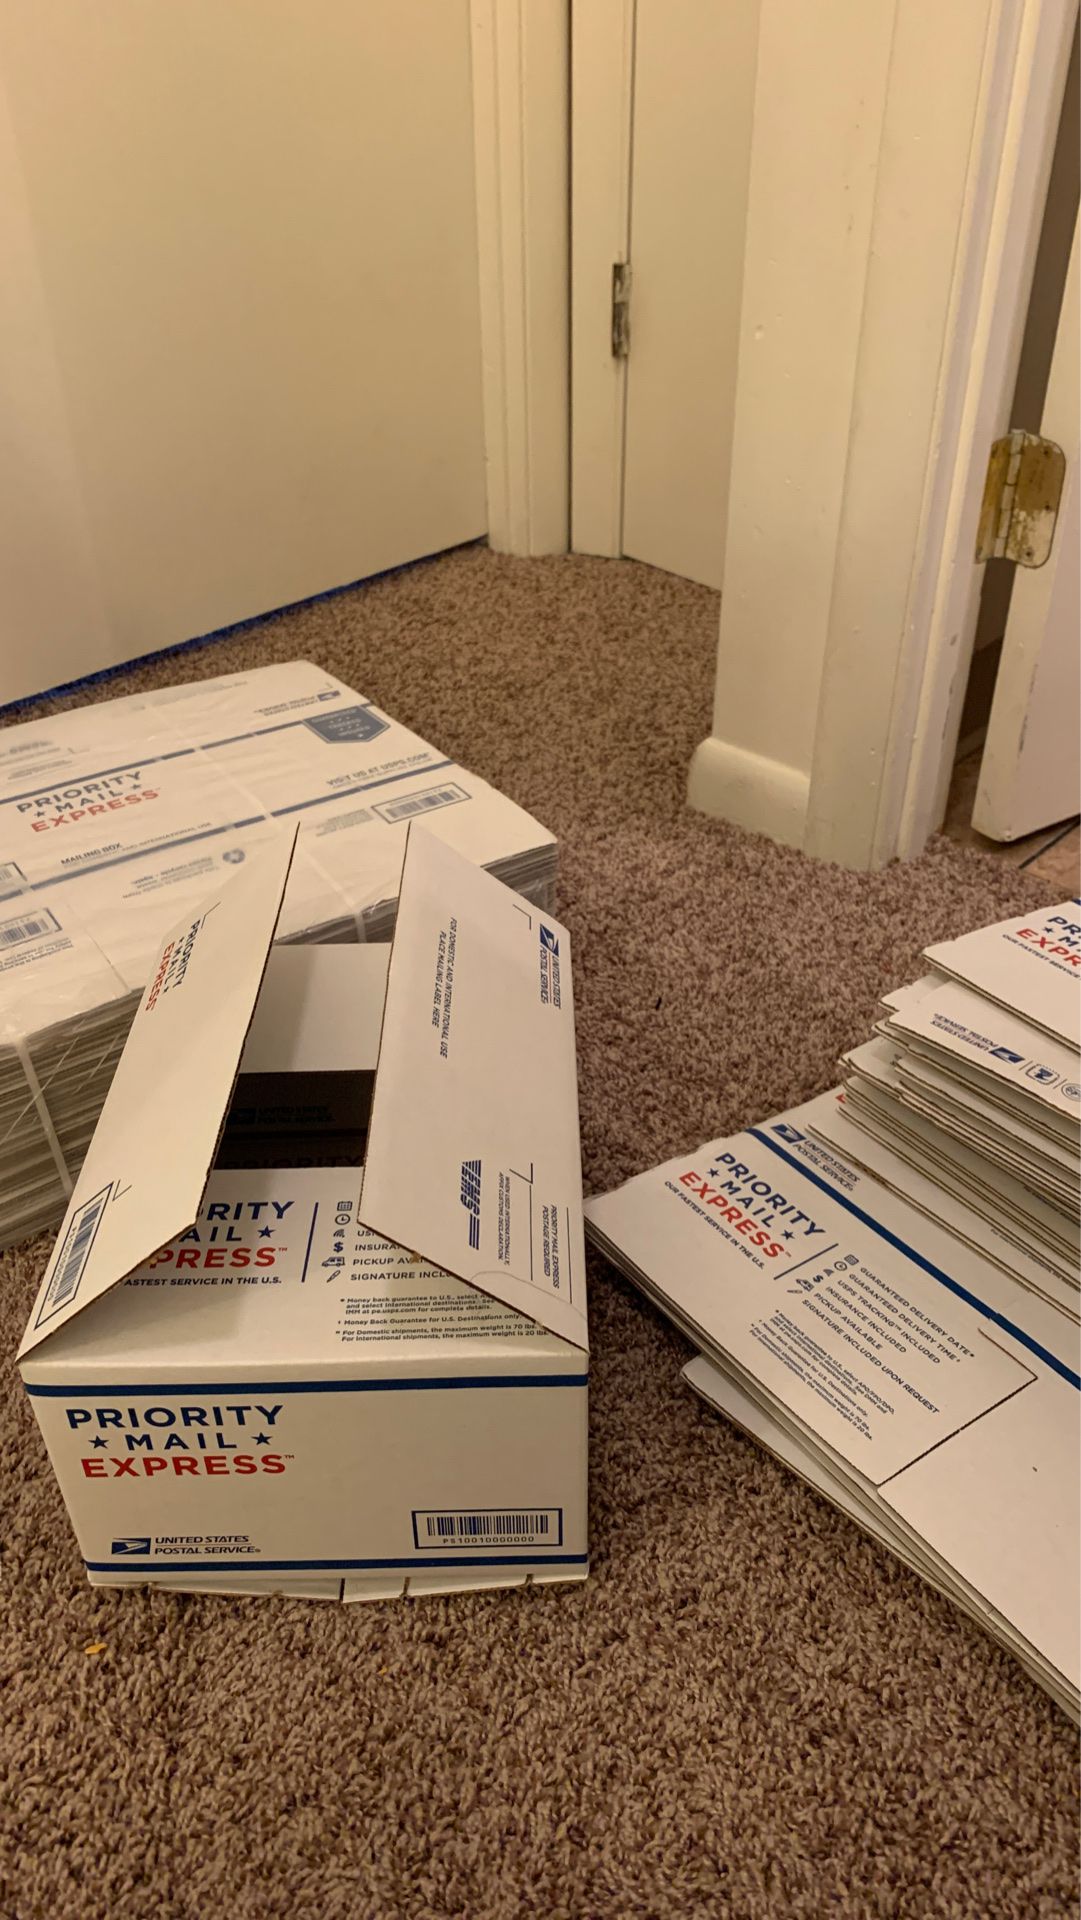 Priority mail express boxes